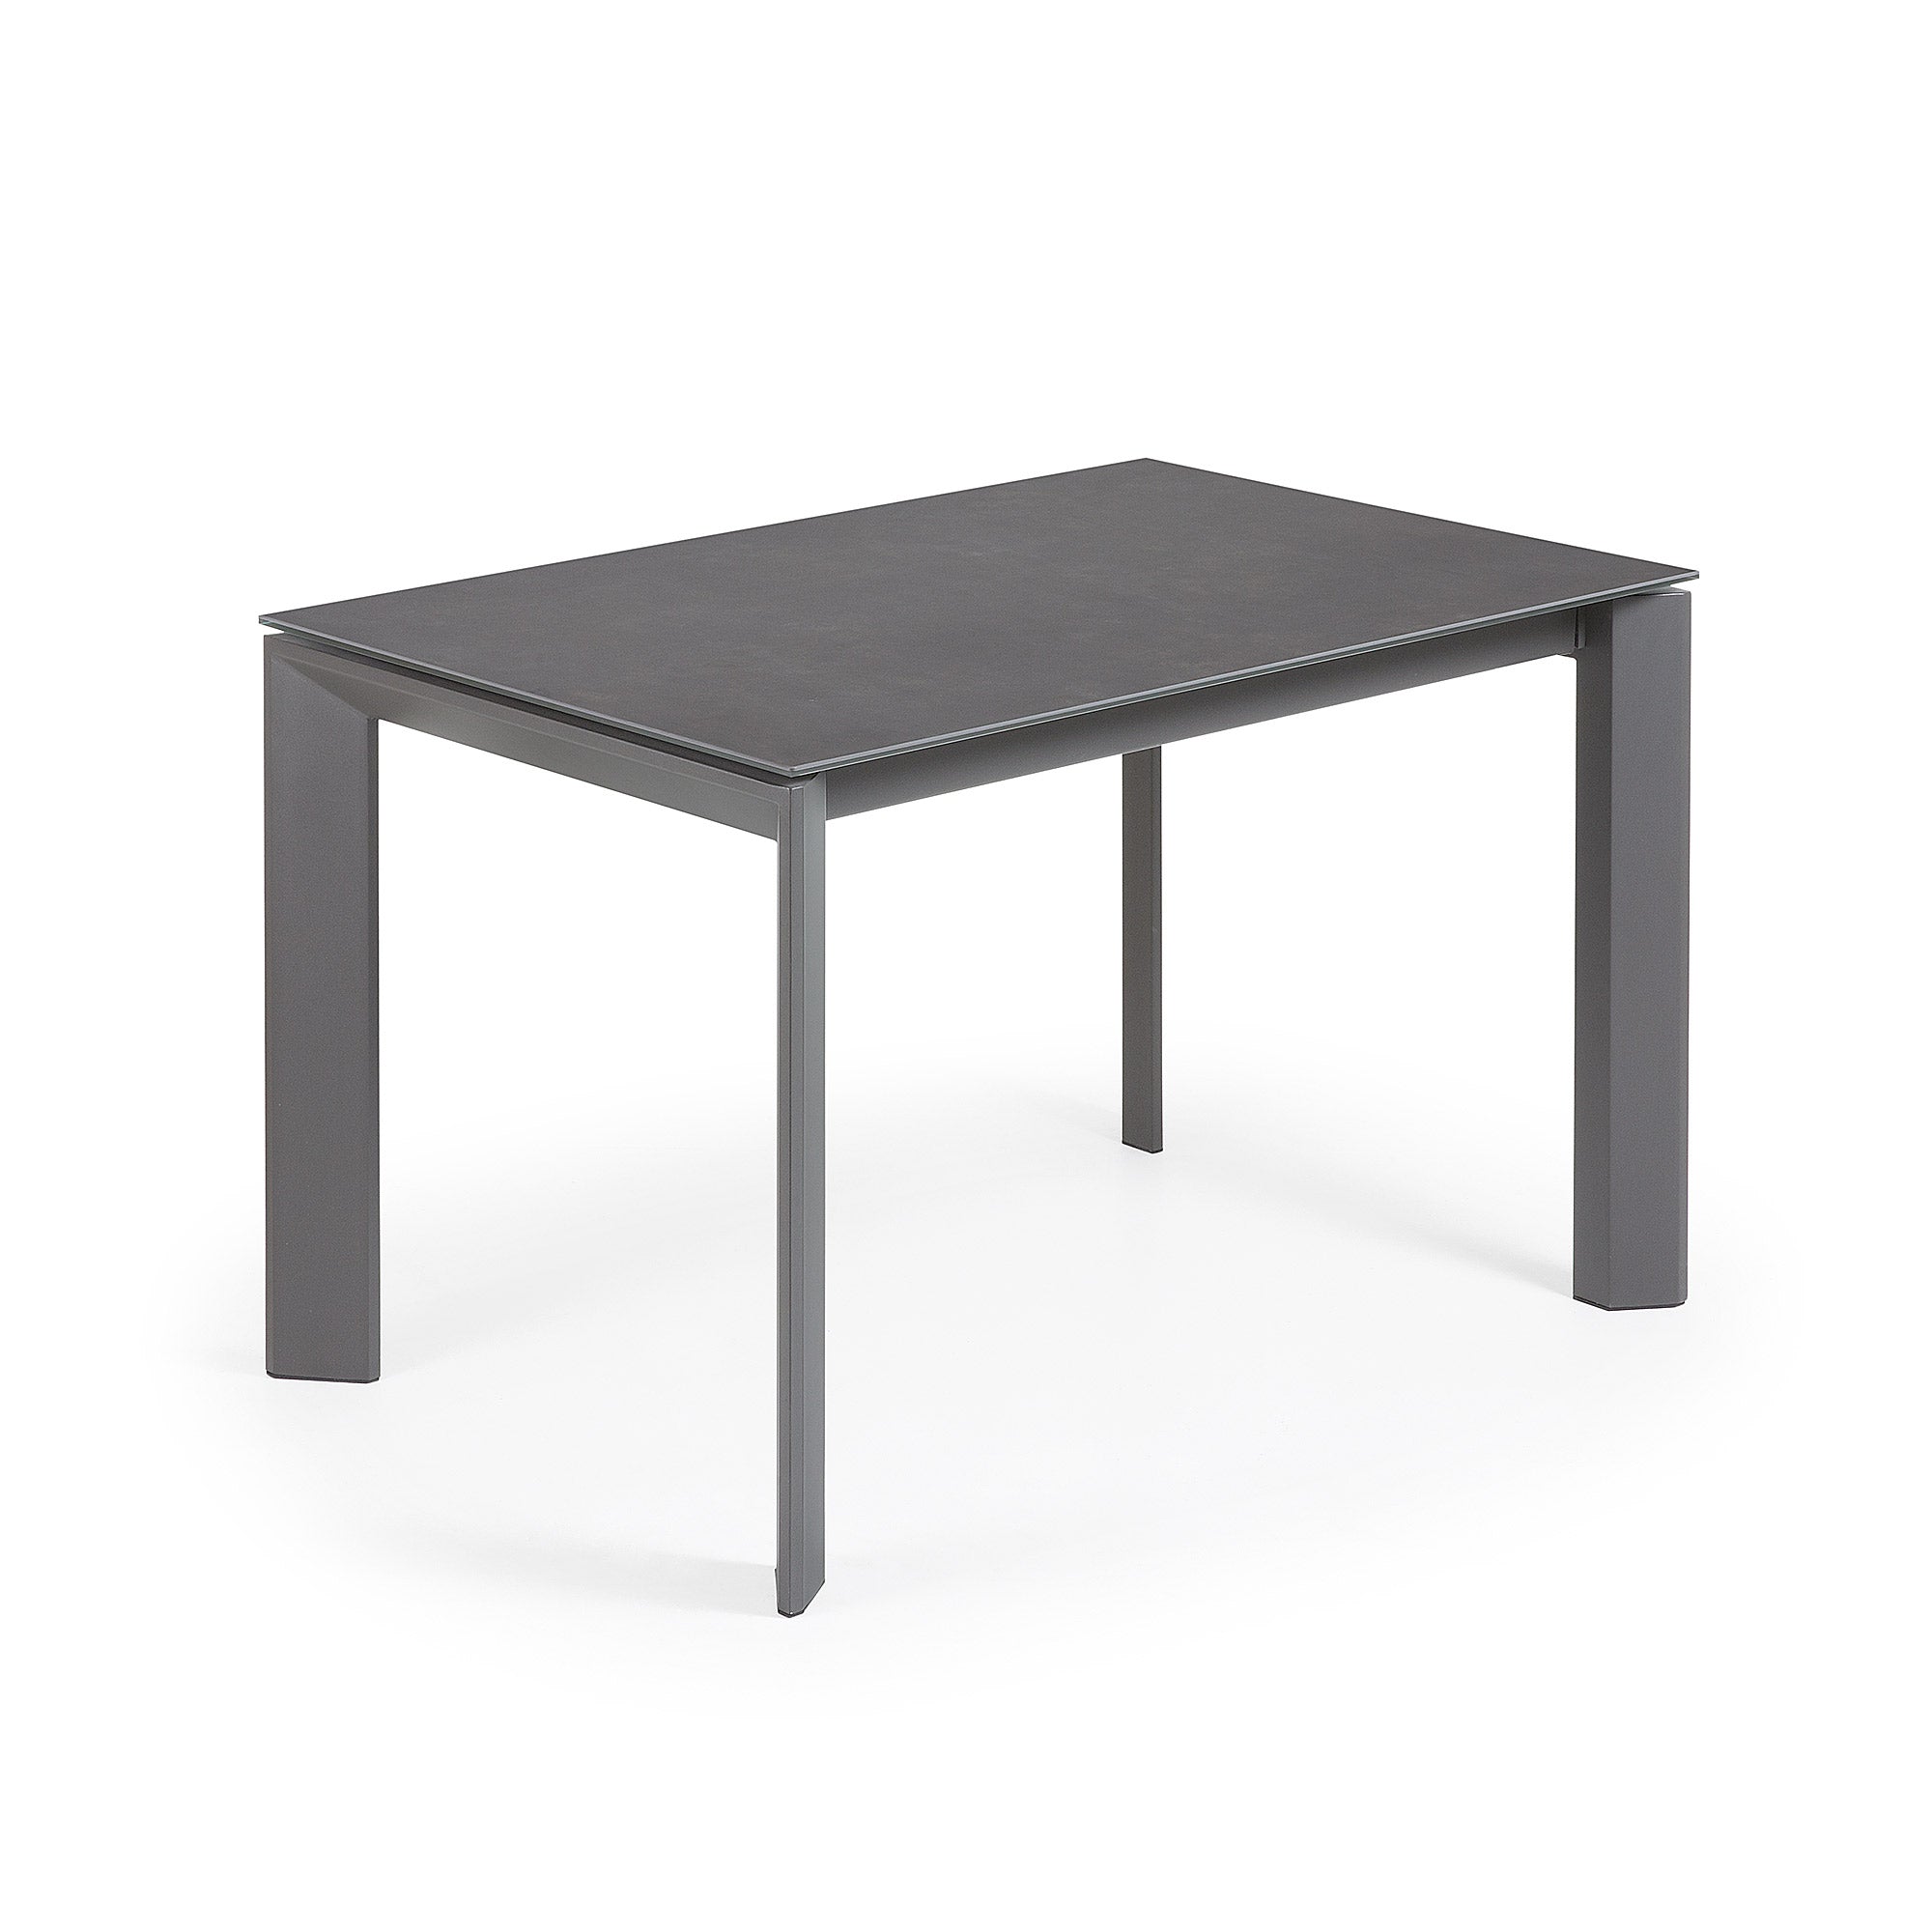 Axis extendable porcelain table with Volcano Rock finish and dark grey steel legs, 120 (180) cm